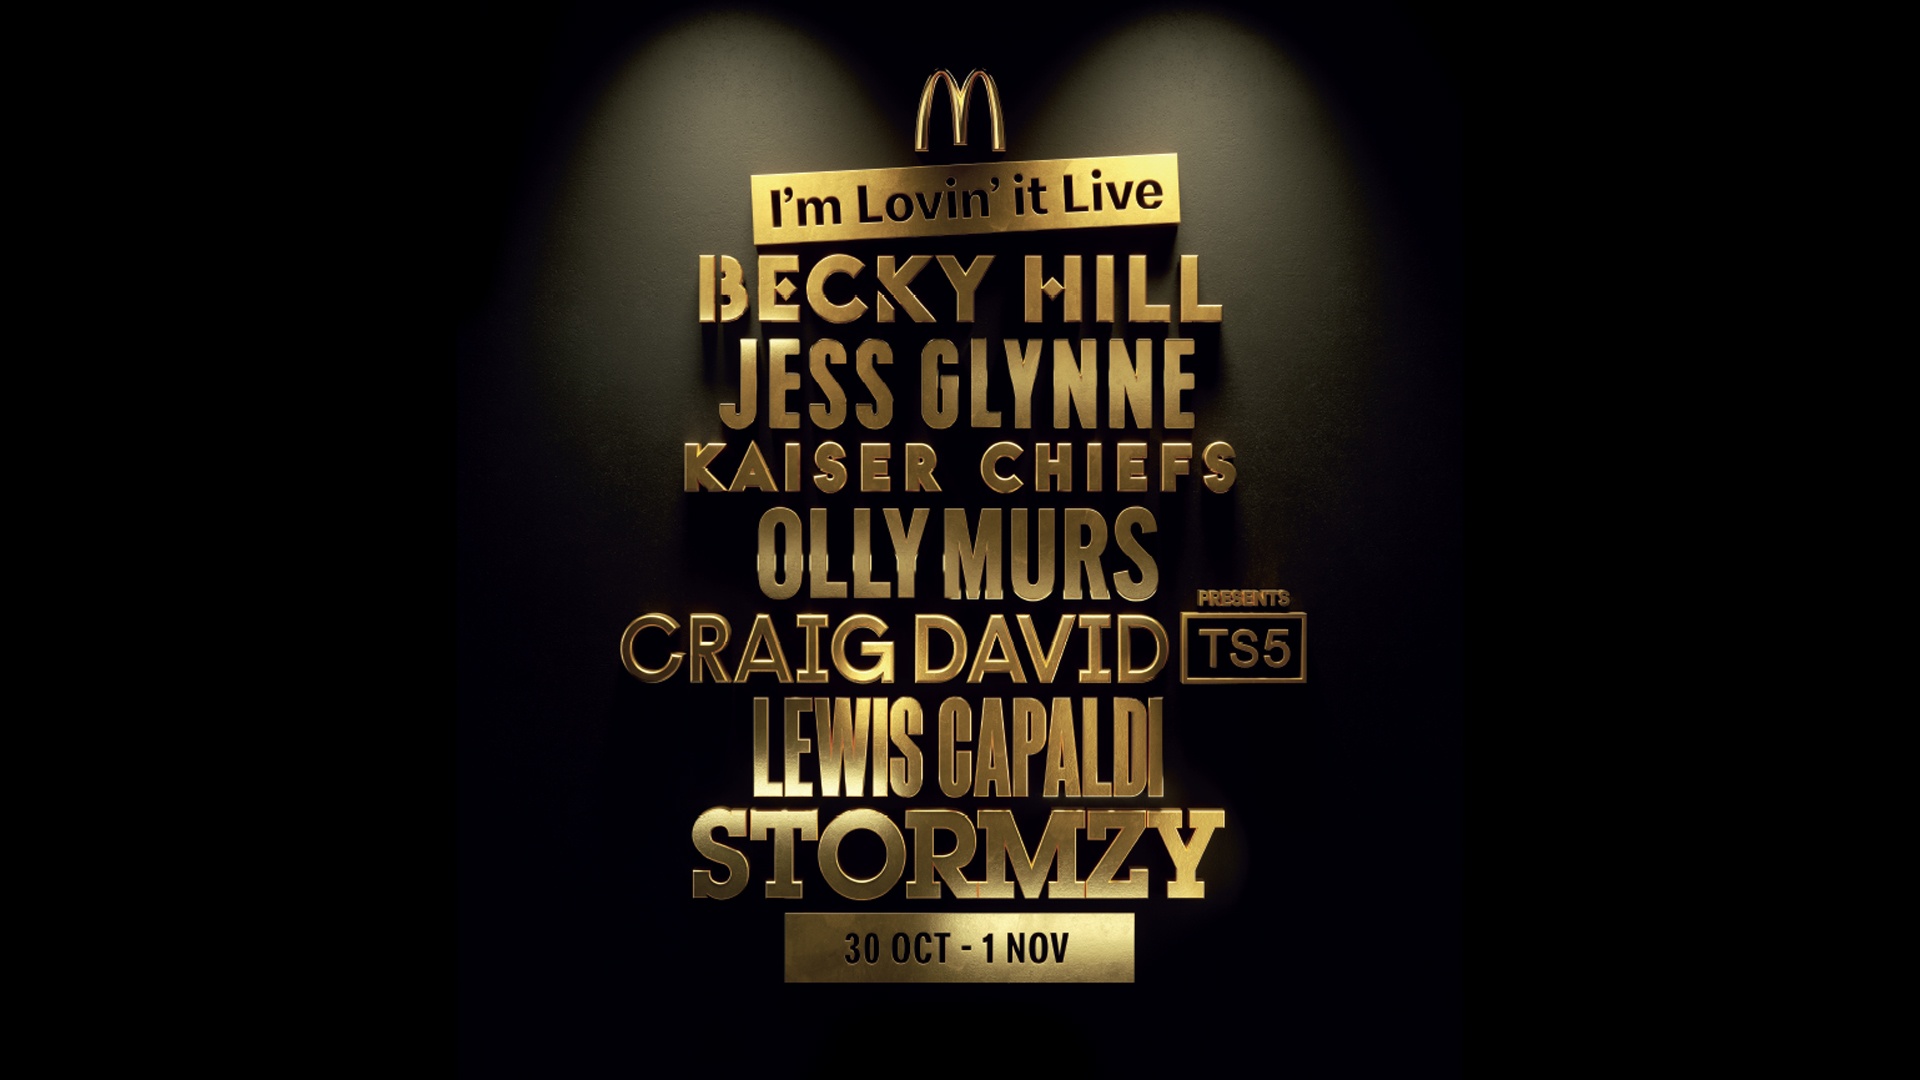 Free Activities and Live Music with the McDonald’s App